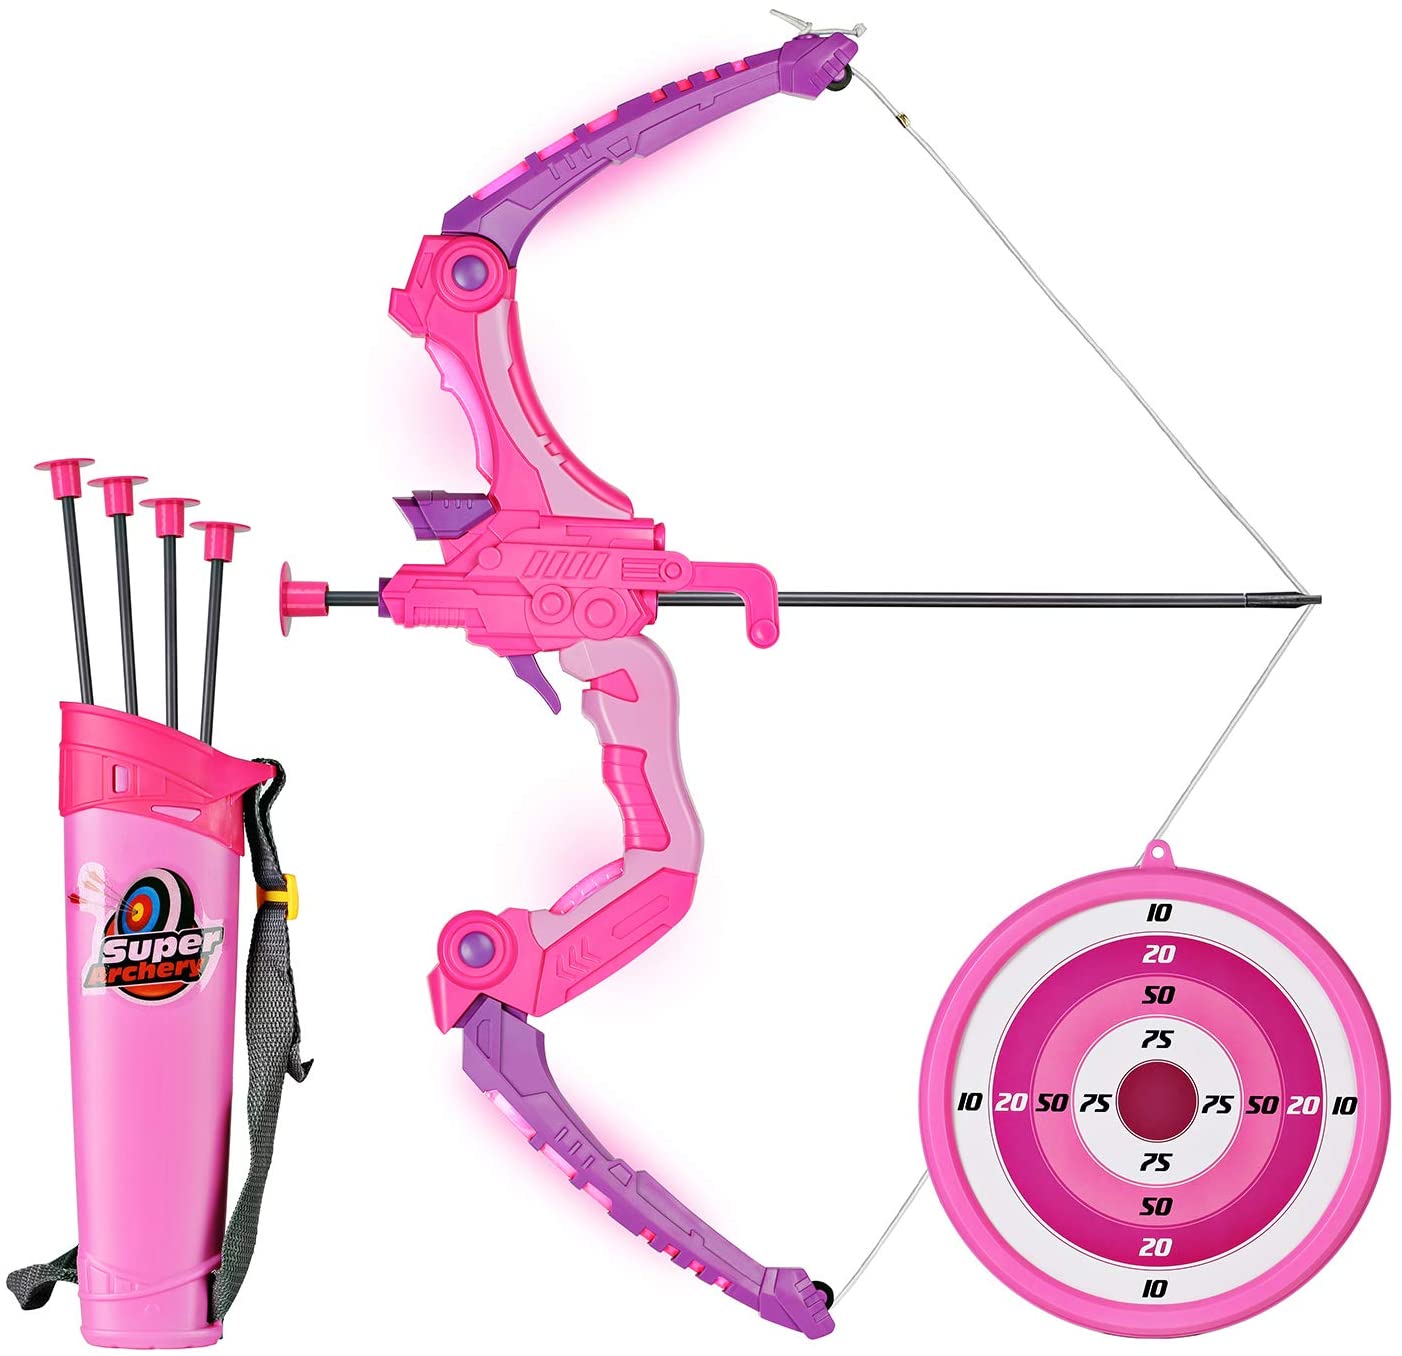 SainSmart Jr. Kids Bow and Arrows, Light Up Archery Set for Kids Outdoor Hunting Game with 5 Durable Suction Cup Arrows, Luminous Bow and Sighting Device, Pink - image 1 of 3